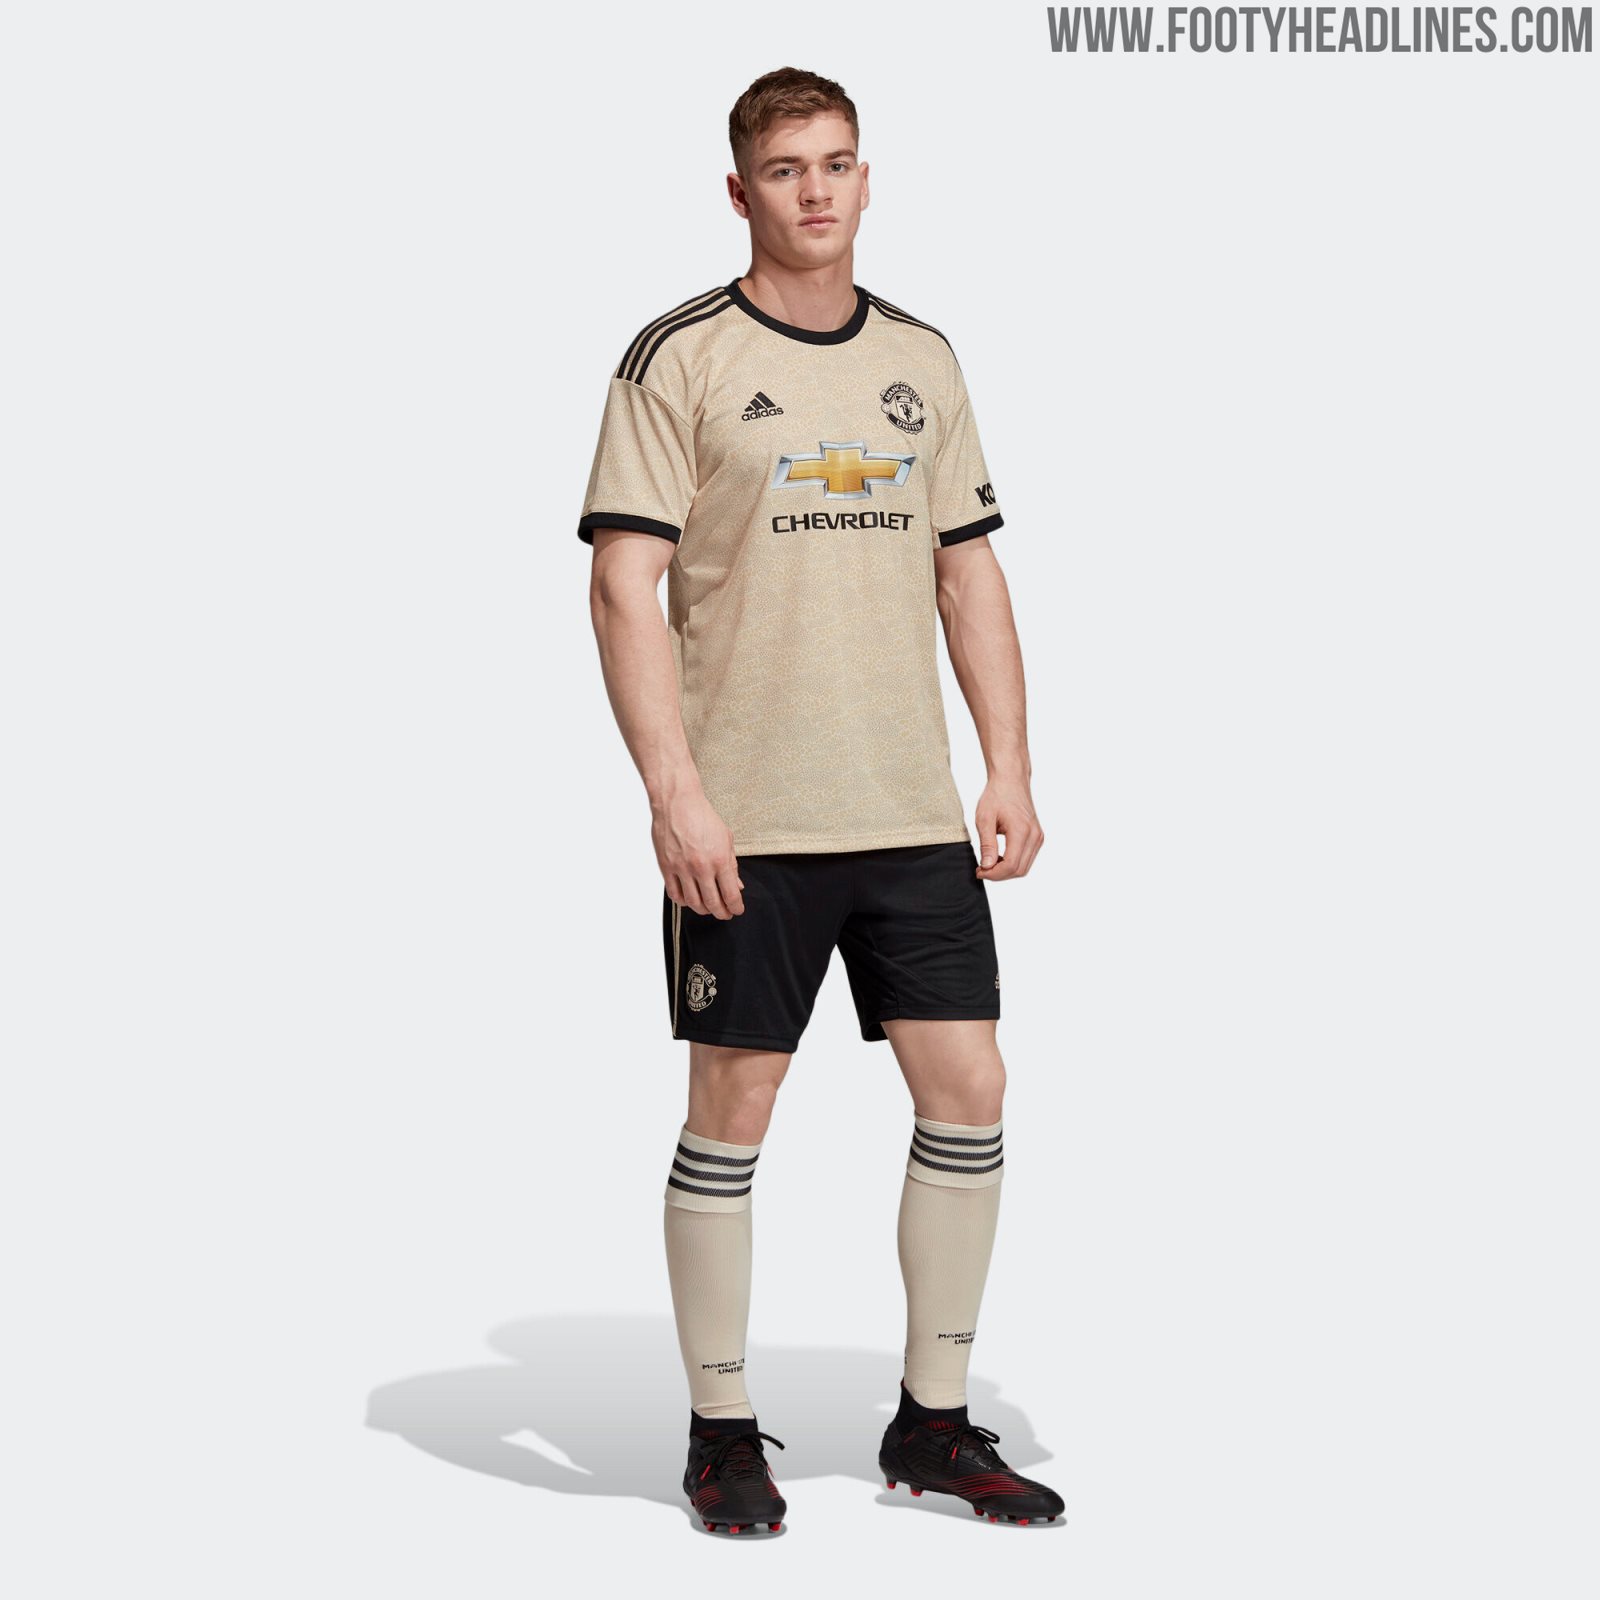 Manchester United 19-20 Away Kit Released - Footy Headlines